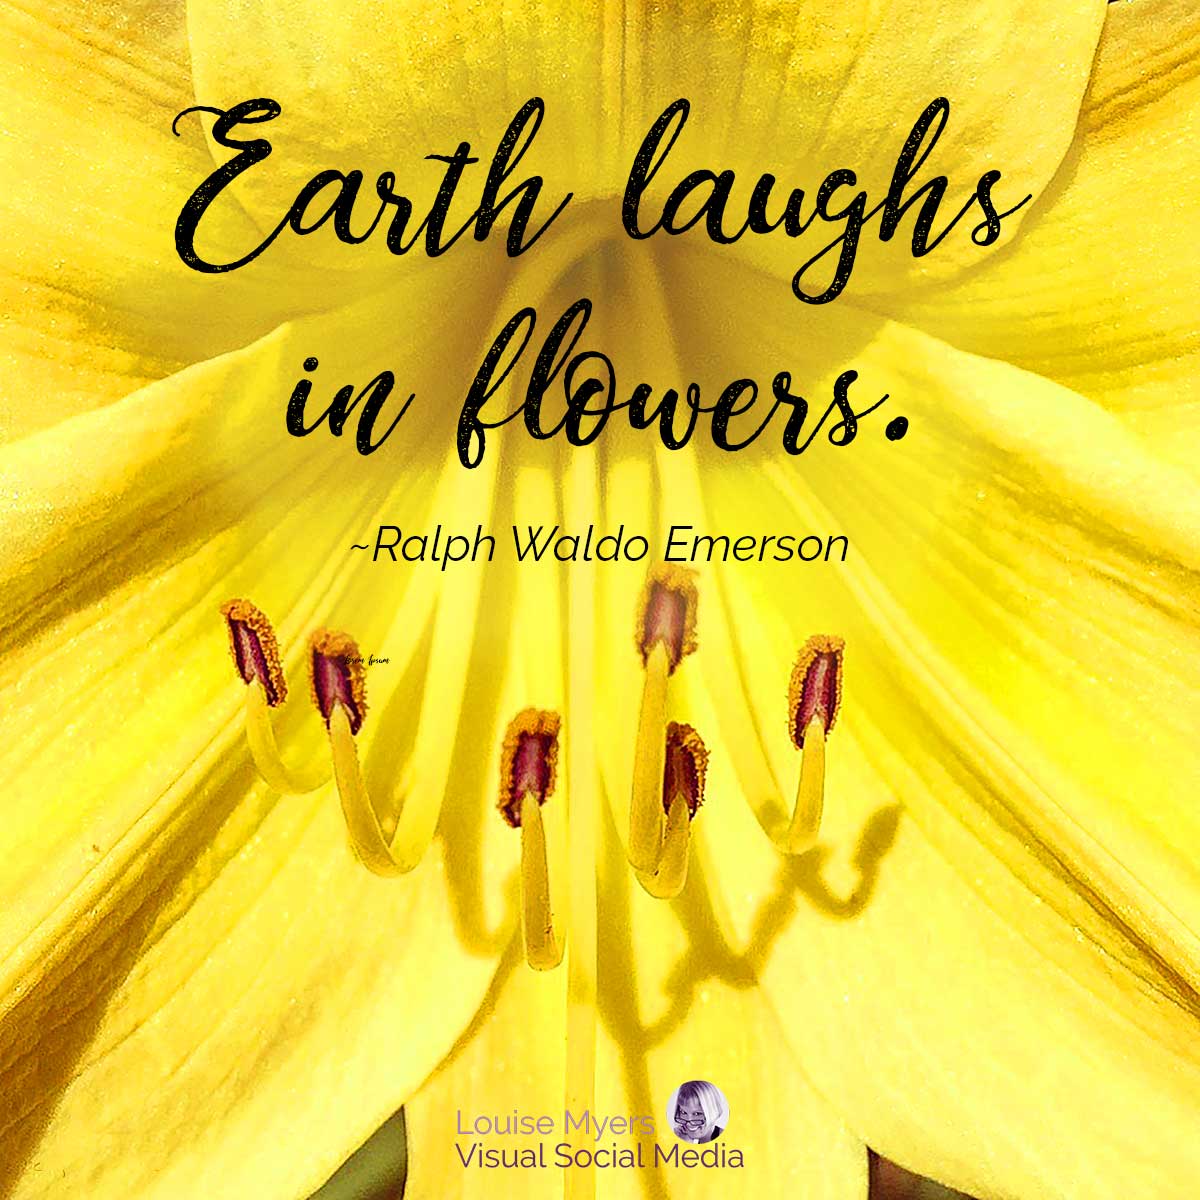 yellow daylily with script quote Earth laughs in flowers.